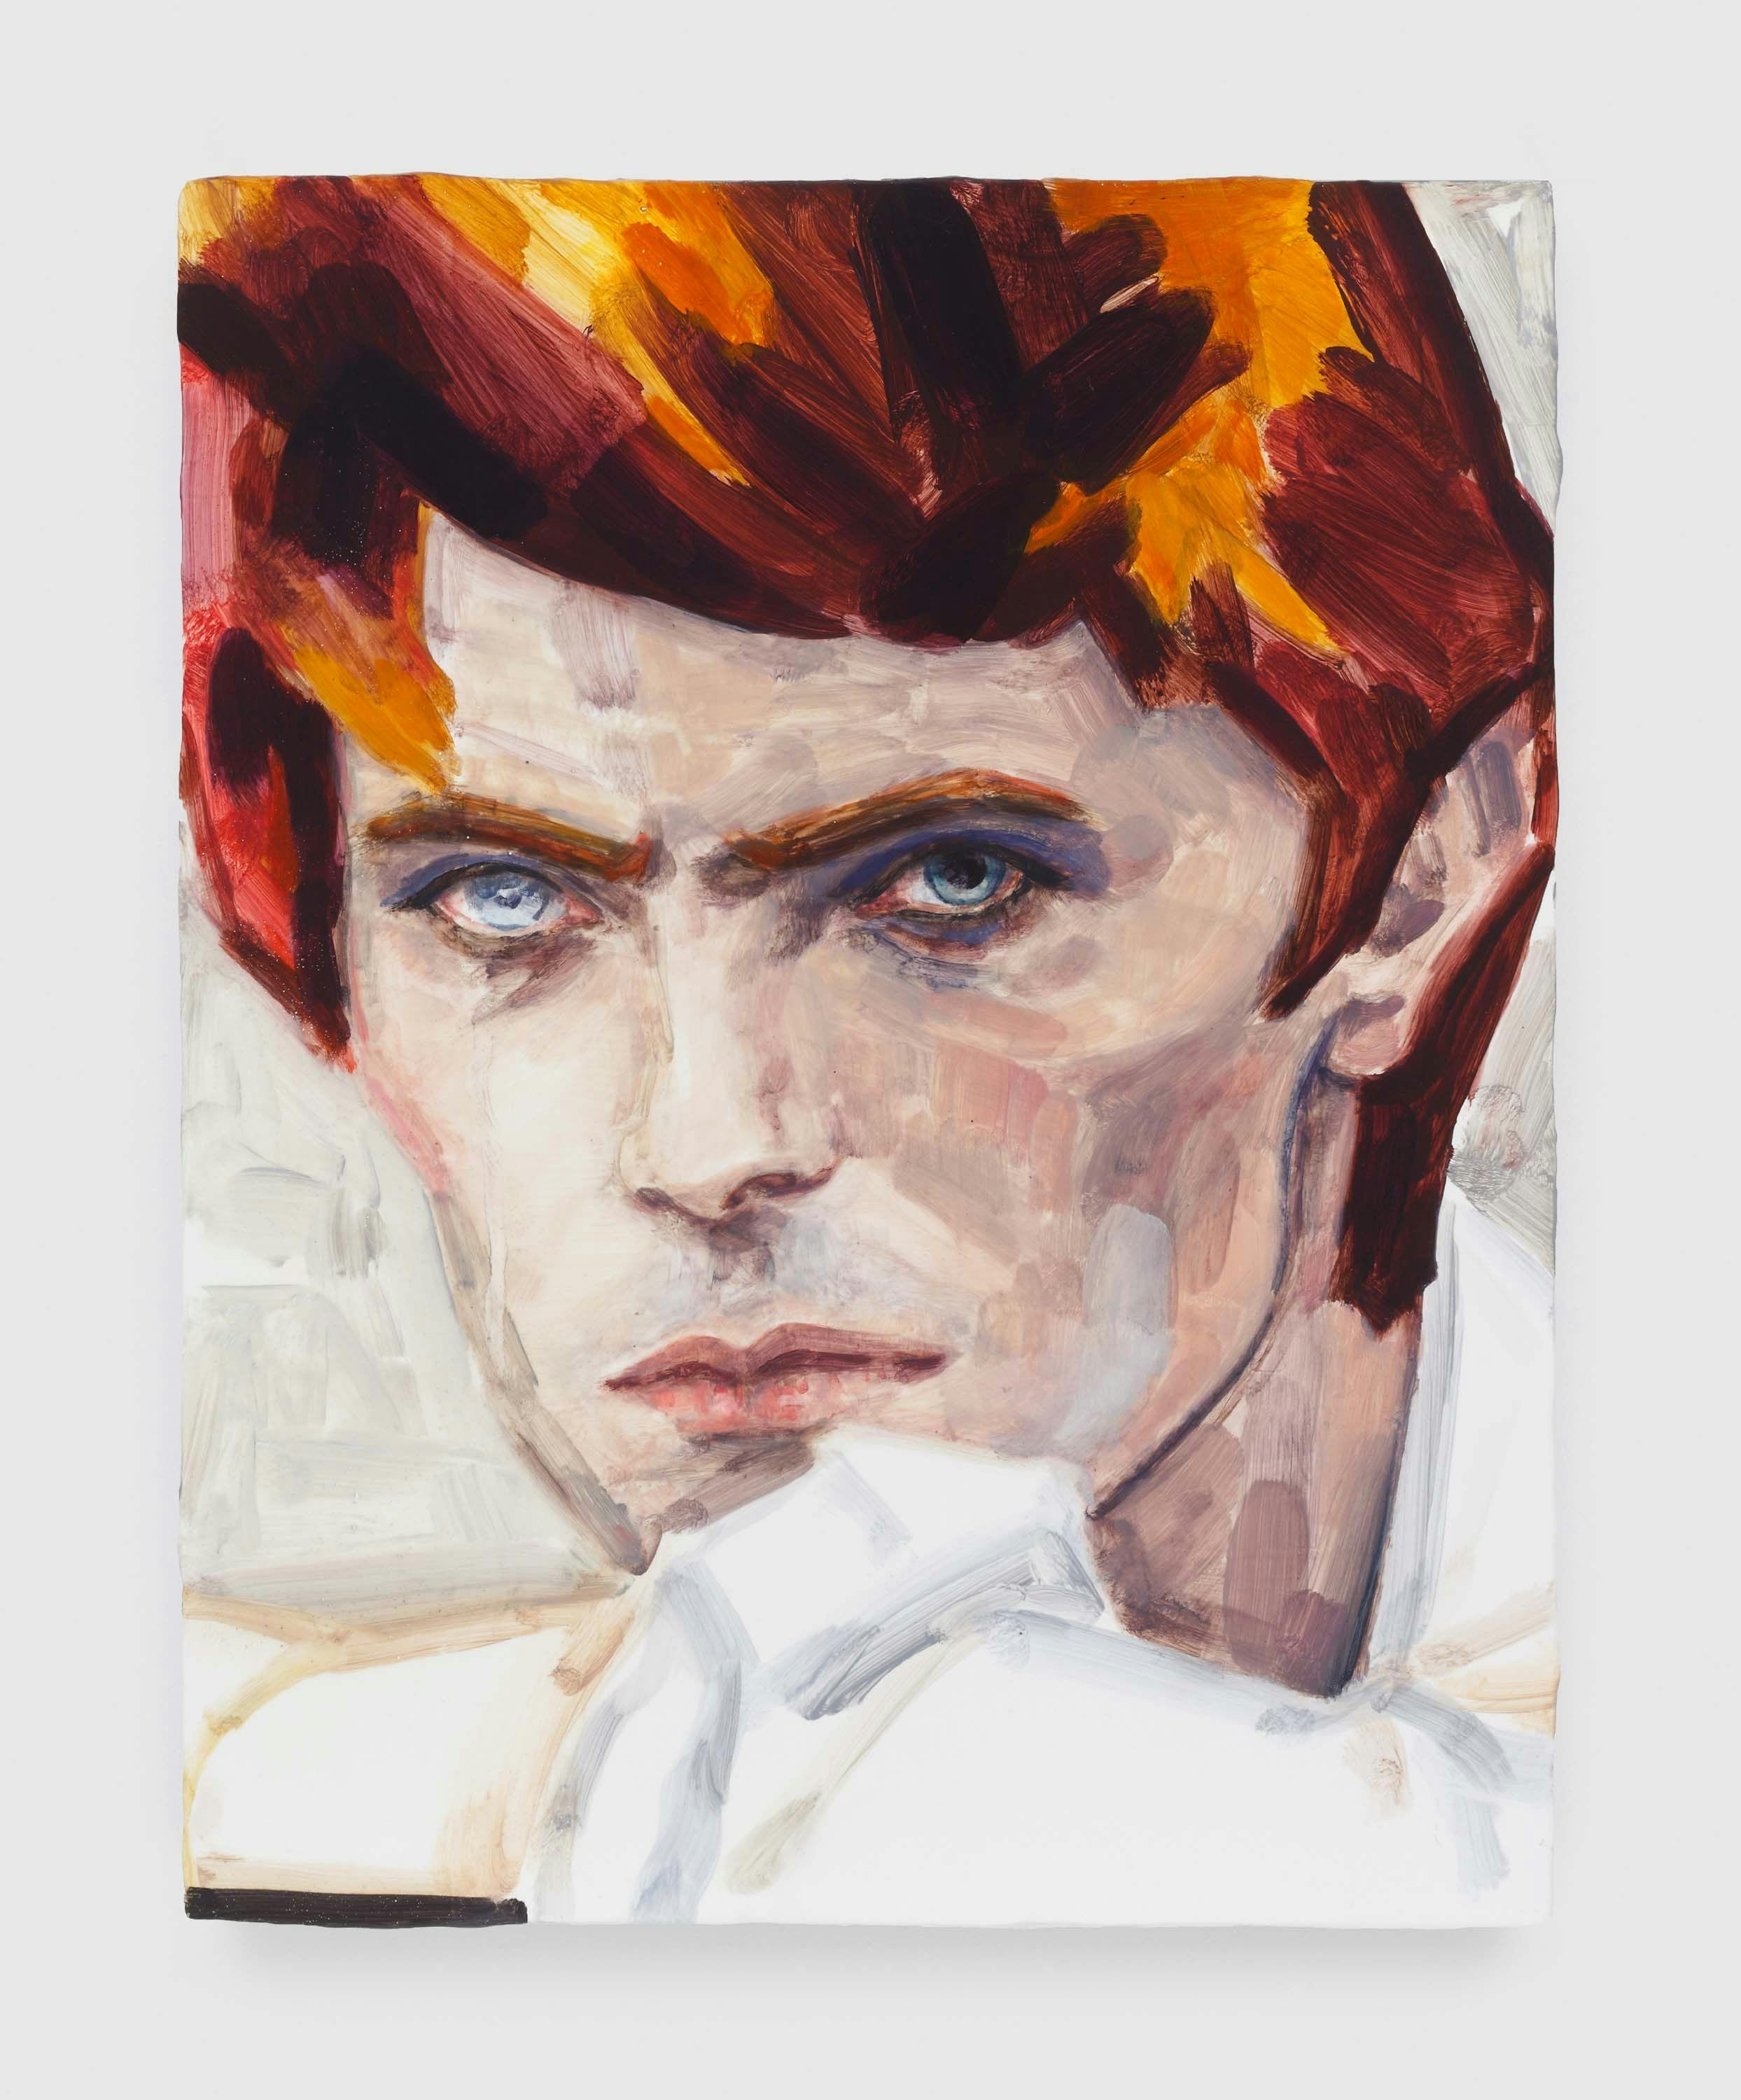 A painting by Elizabeth Peyton, titled David Bowie, dated 2012.